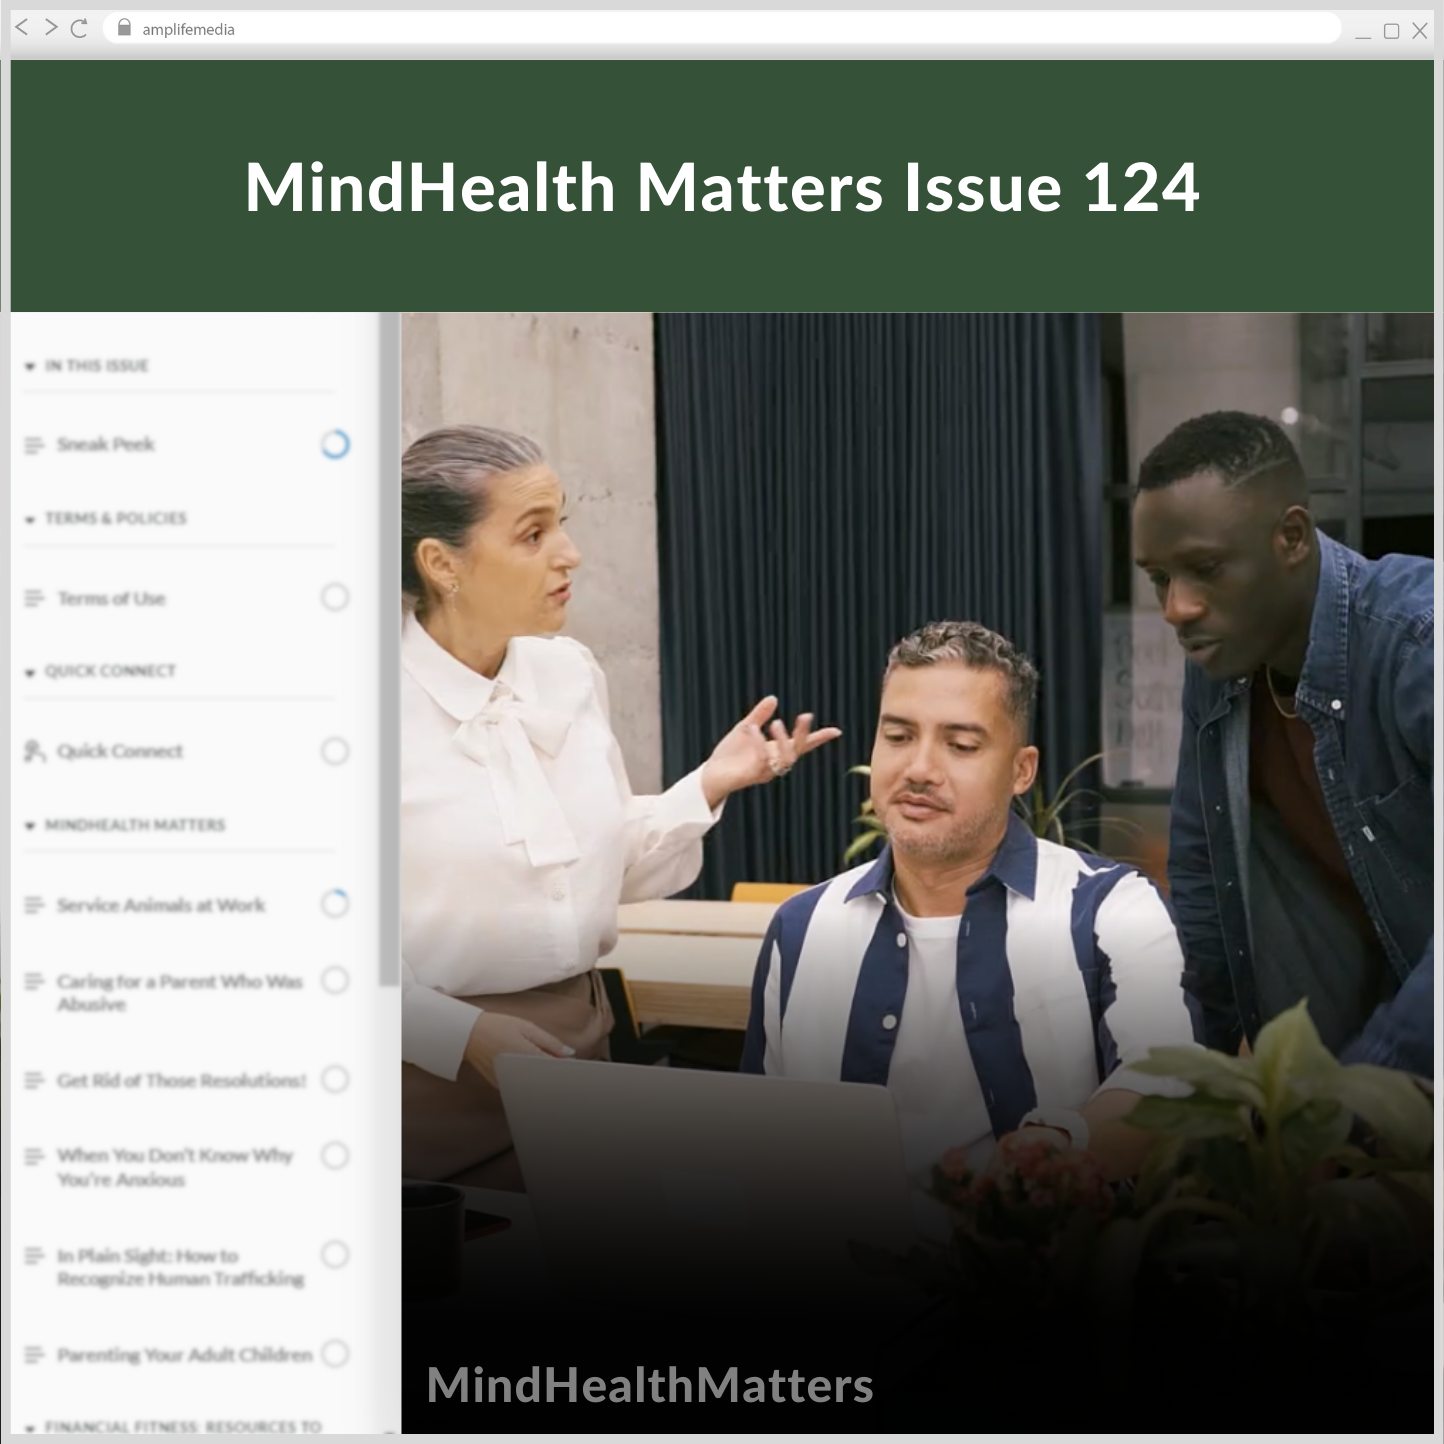 Subscription to Wellbeing Media: MindHealth Matters 124